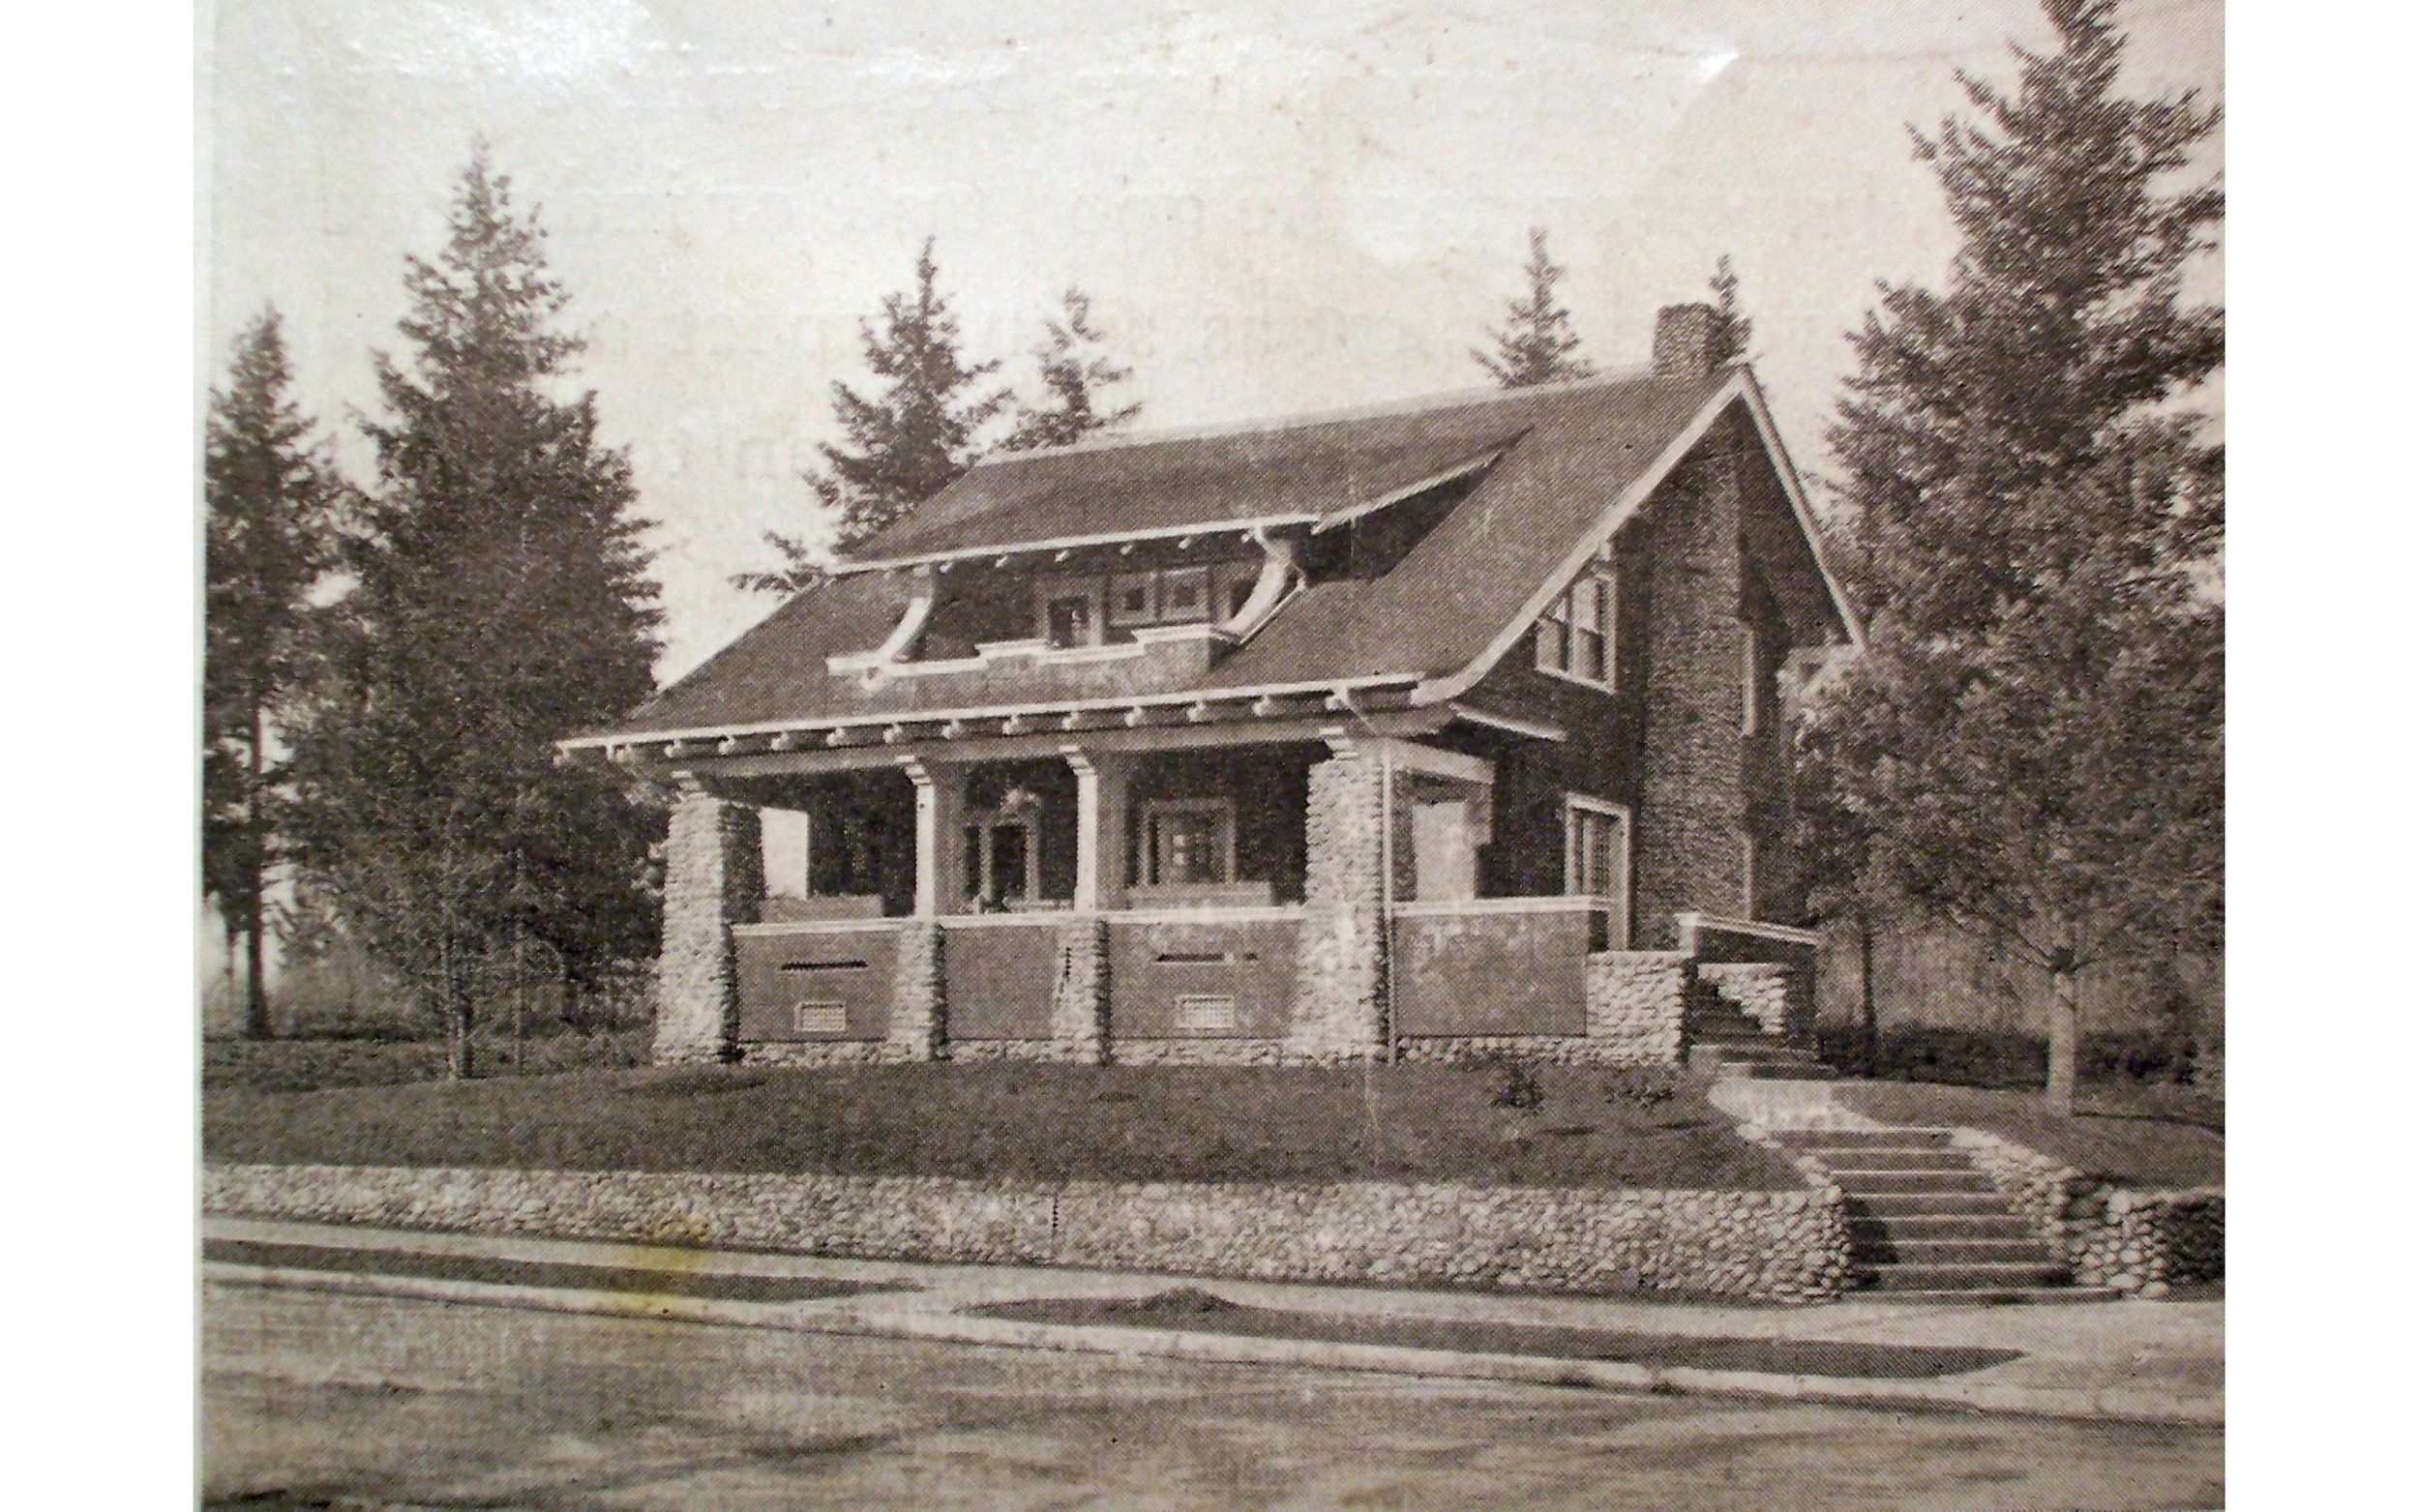  House built for Gertrude and Joseph Harker Smith, 1831 NE Brazee, ca. 1907.&nbsp; A. H. Faber architect.&nbsp; The river rock retaining wall, porch, and chimney are still extant.&nbsp; 